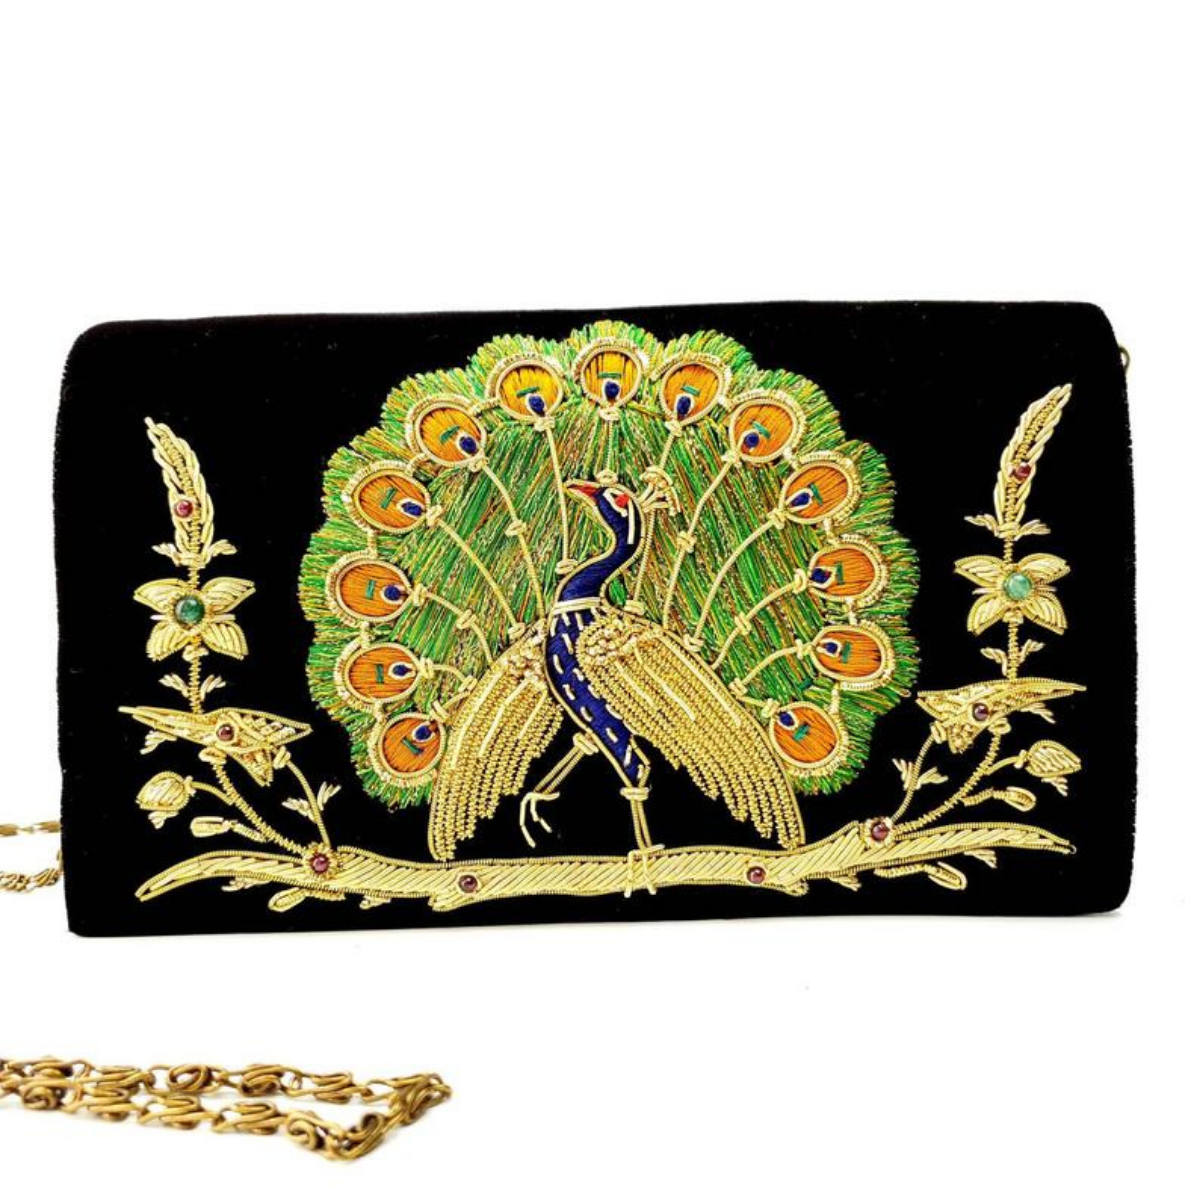 Peacock Embroidered Clutch Bag, Front View